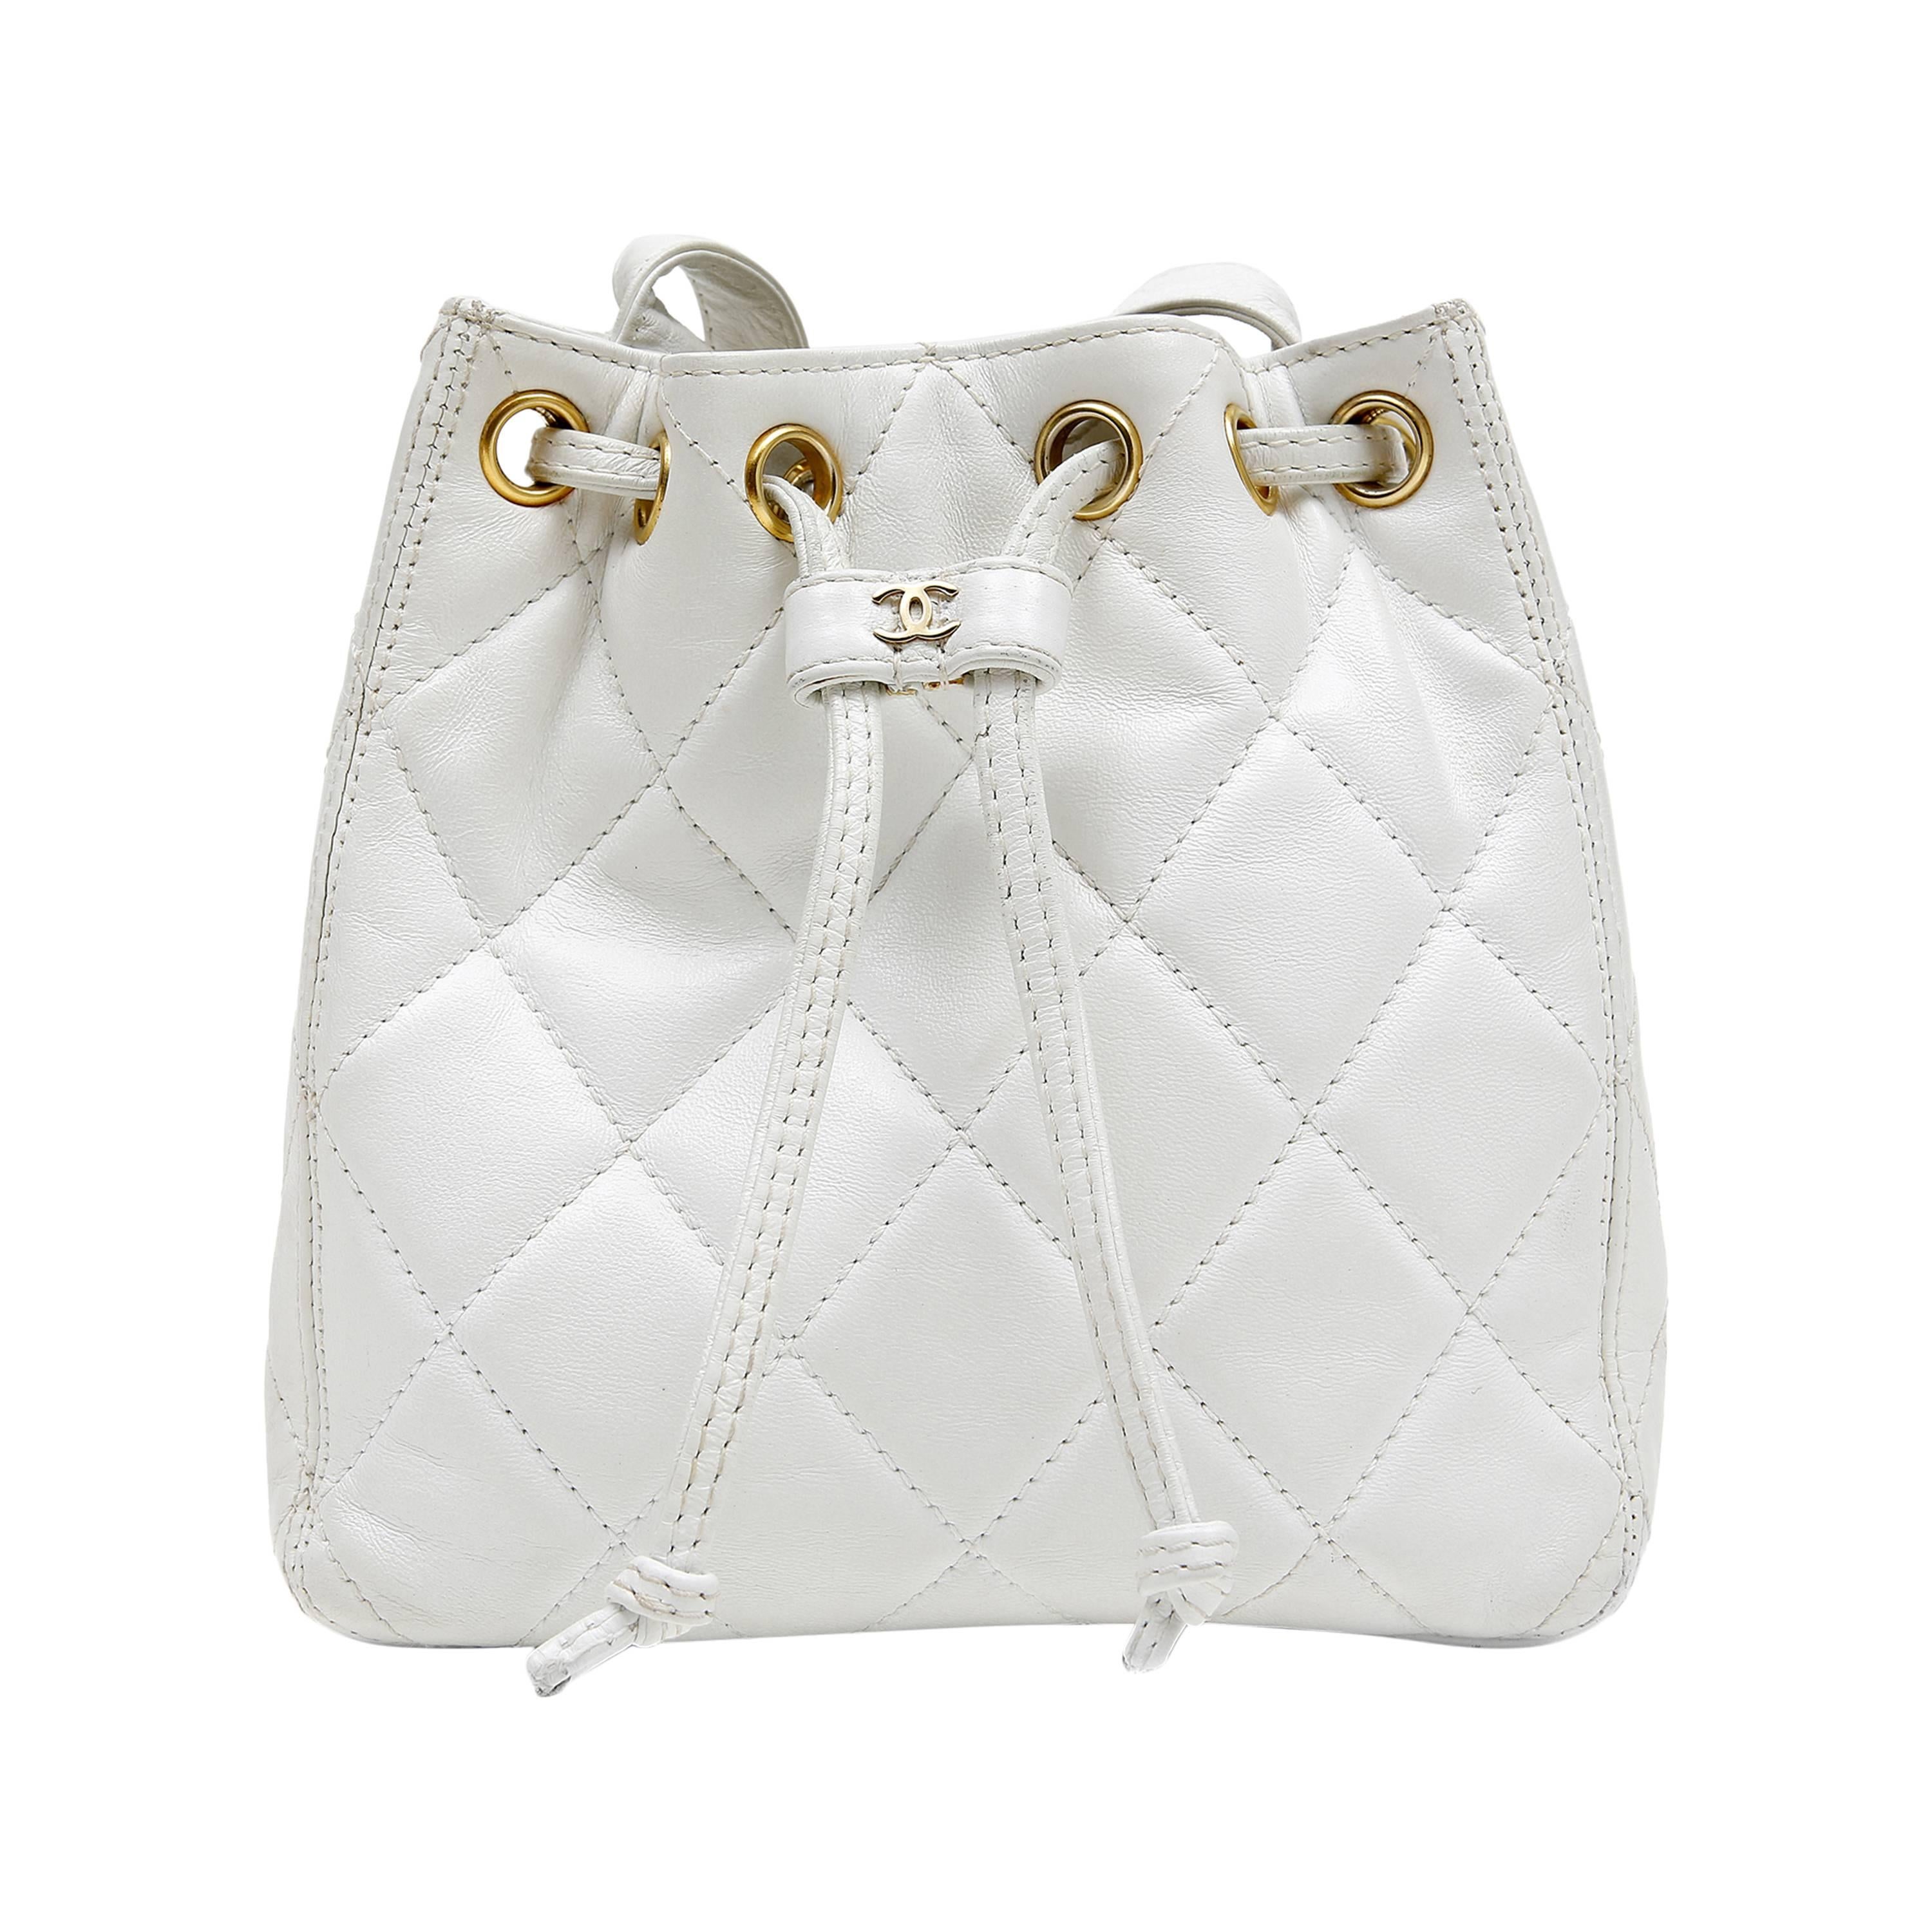 Chanel White Quilted Lambskin Bucket Bag